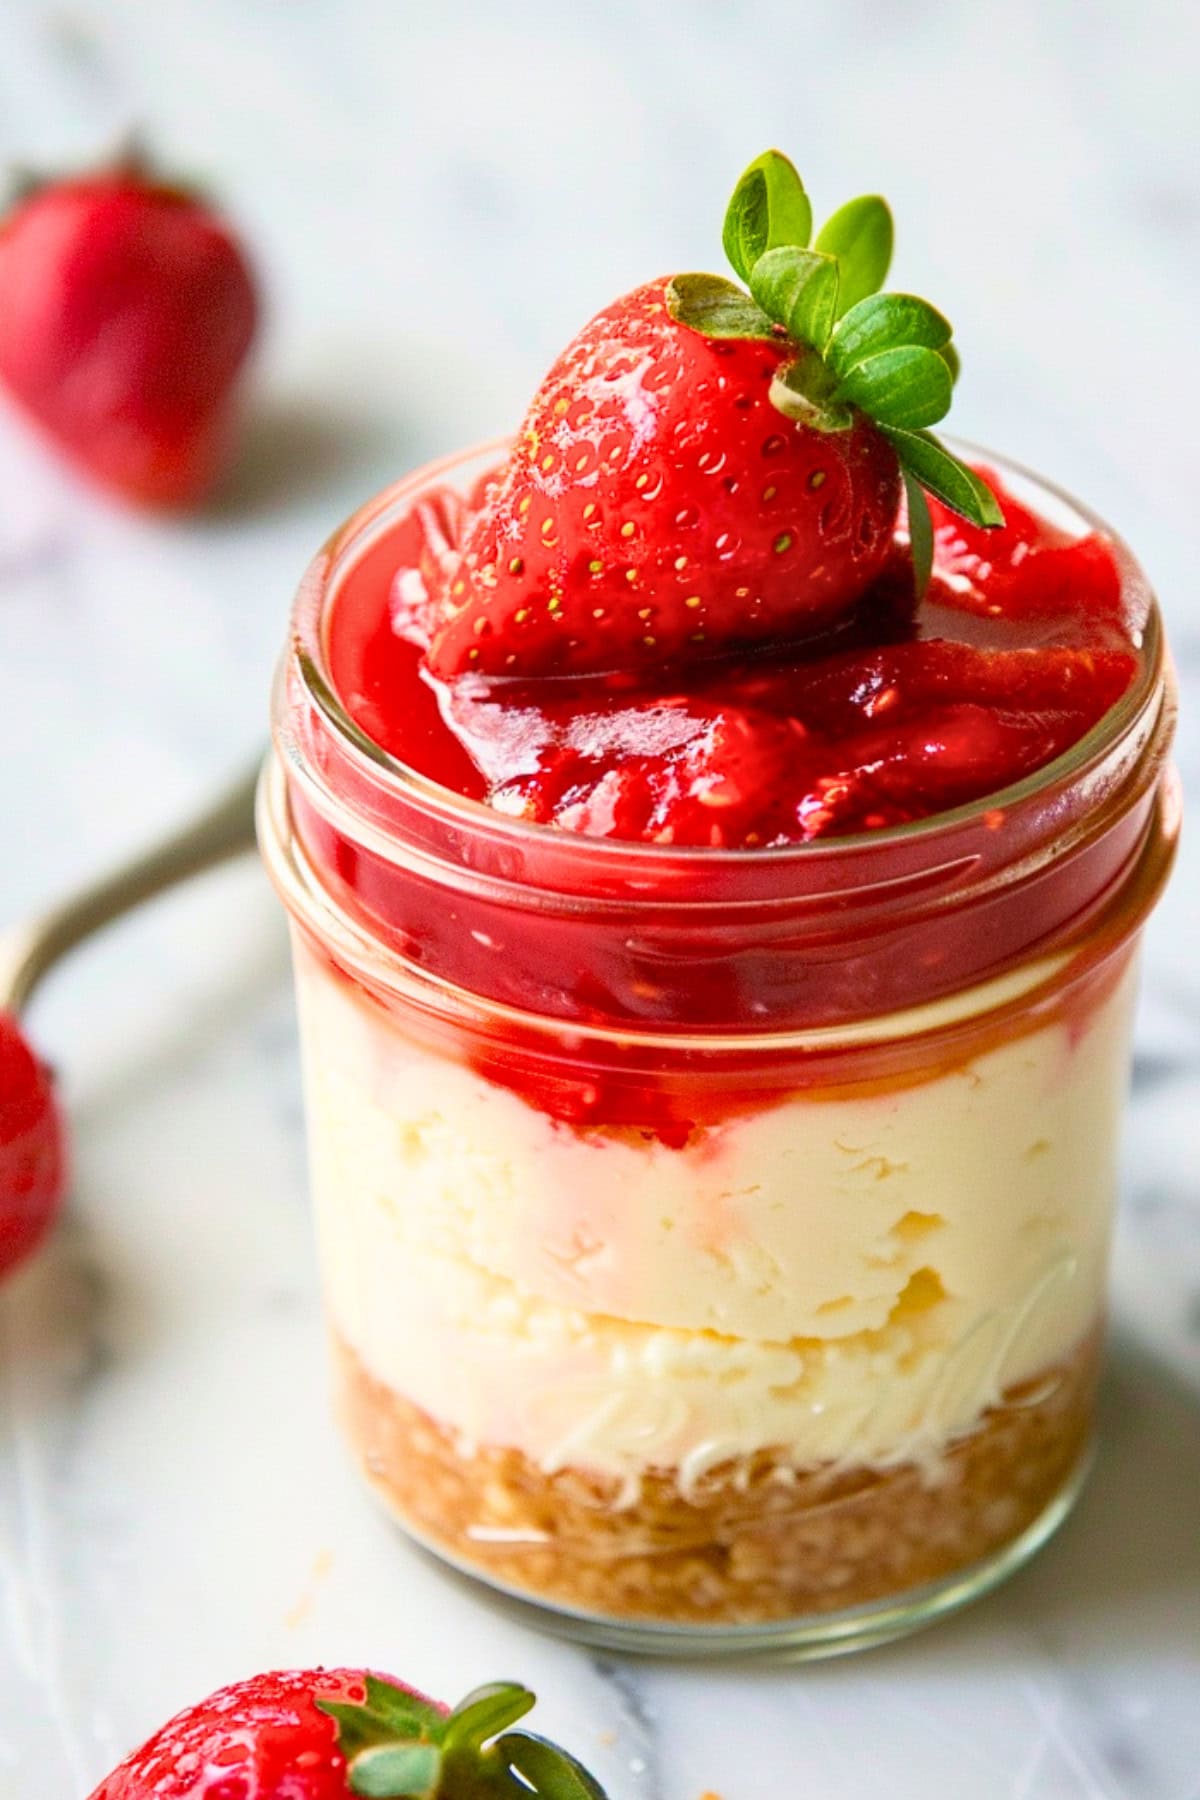 Close-up shot of a jar of cheesecake with fresh strawberry on top.